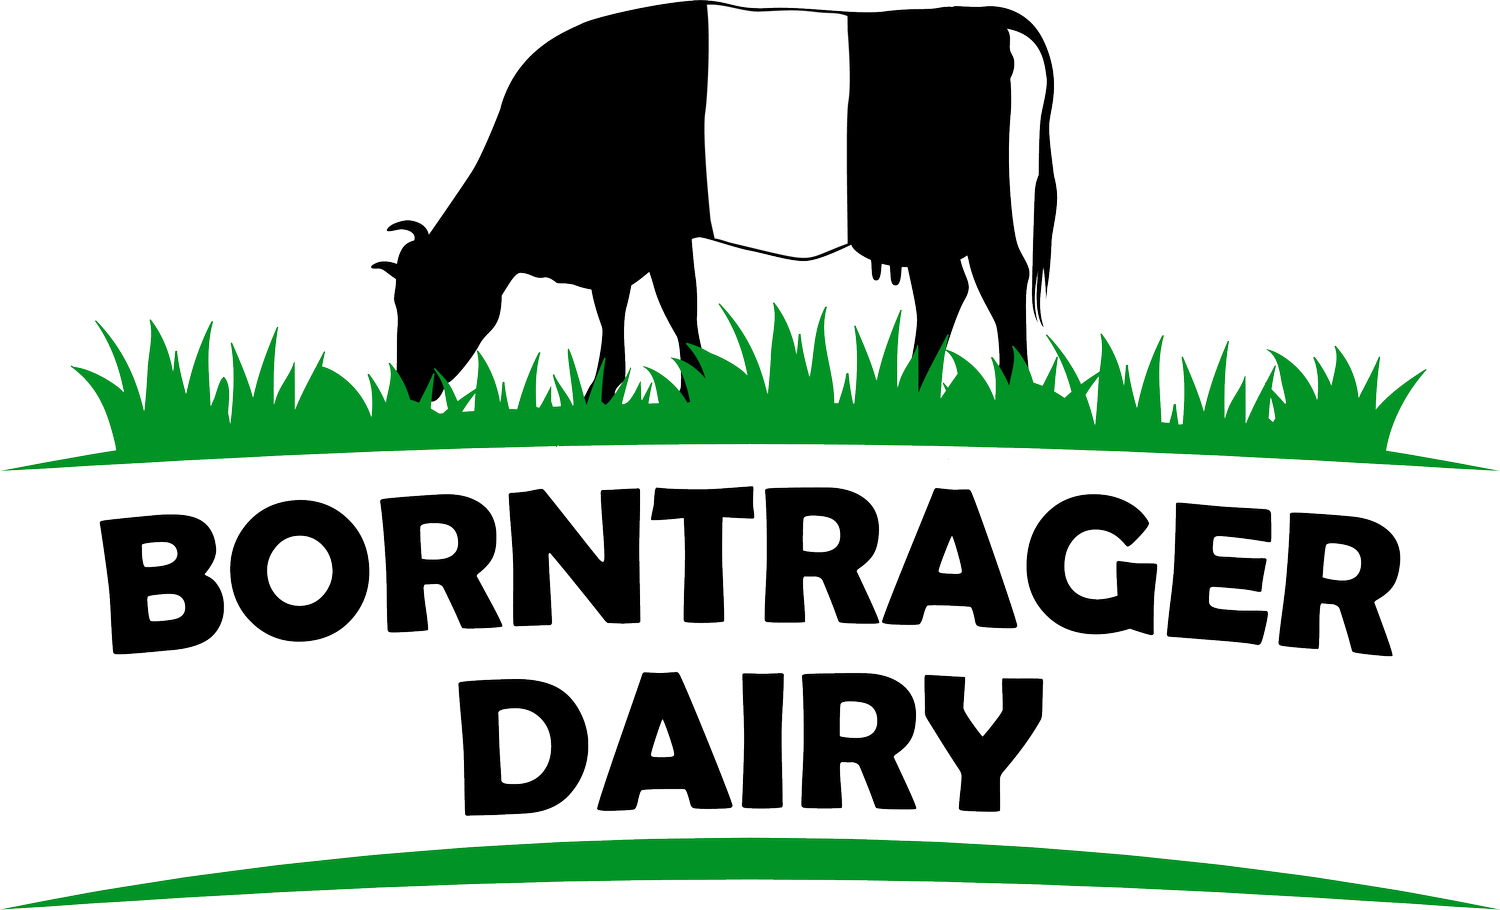 Borntrager Dairy